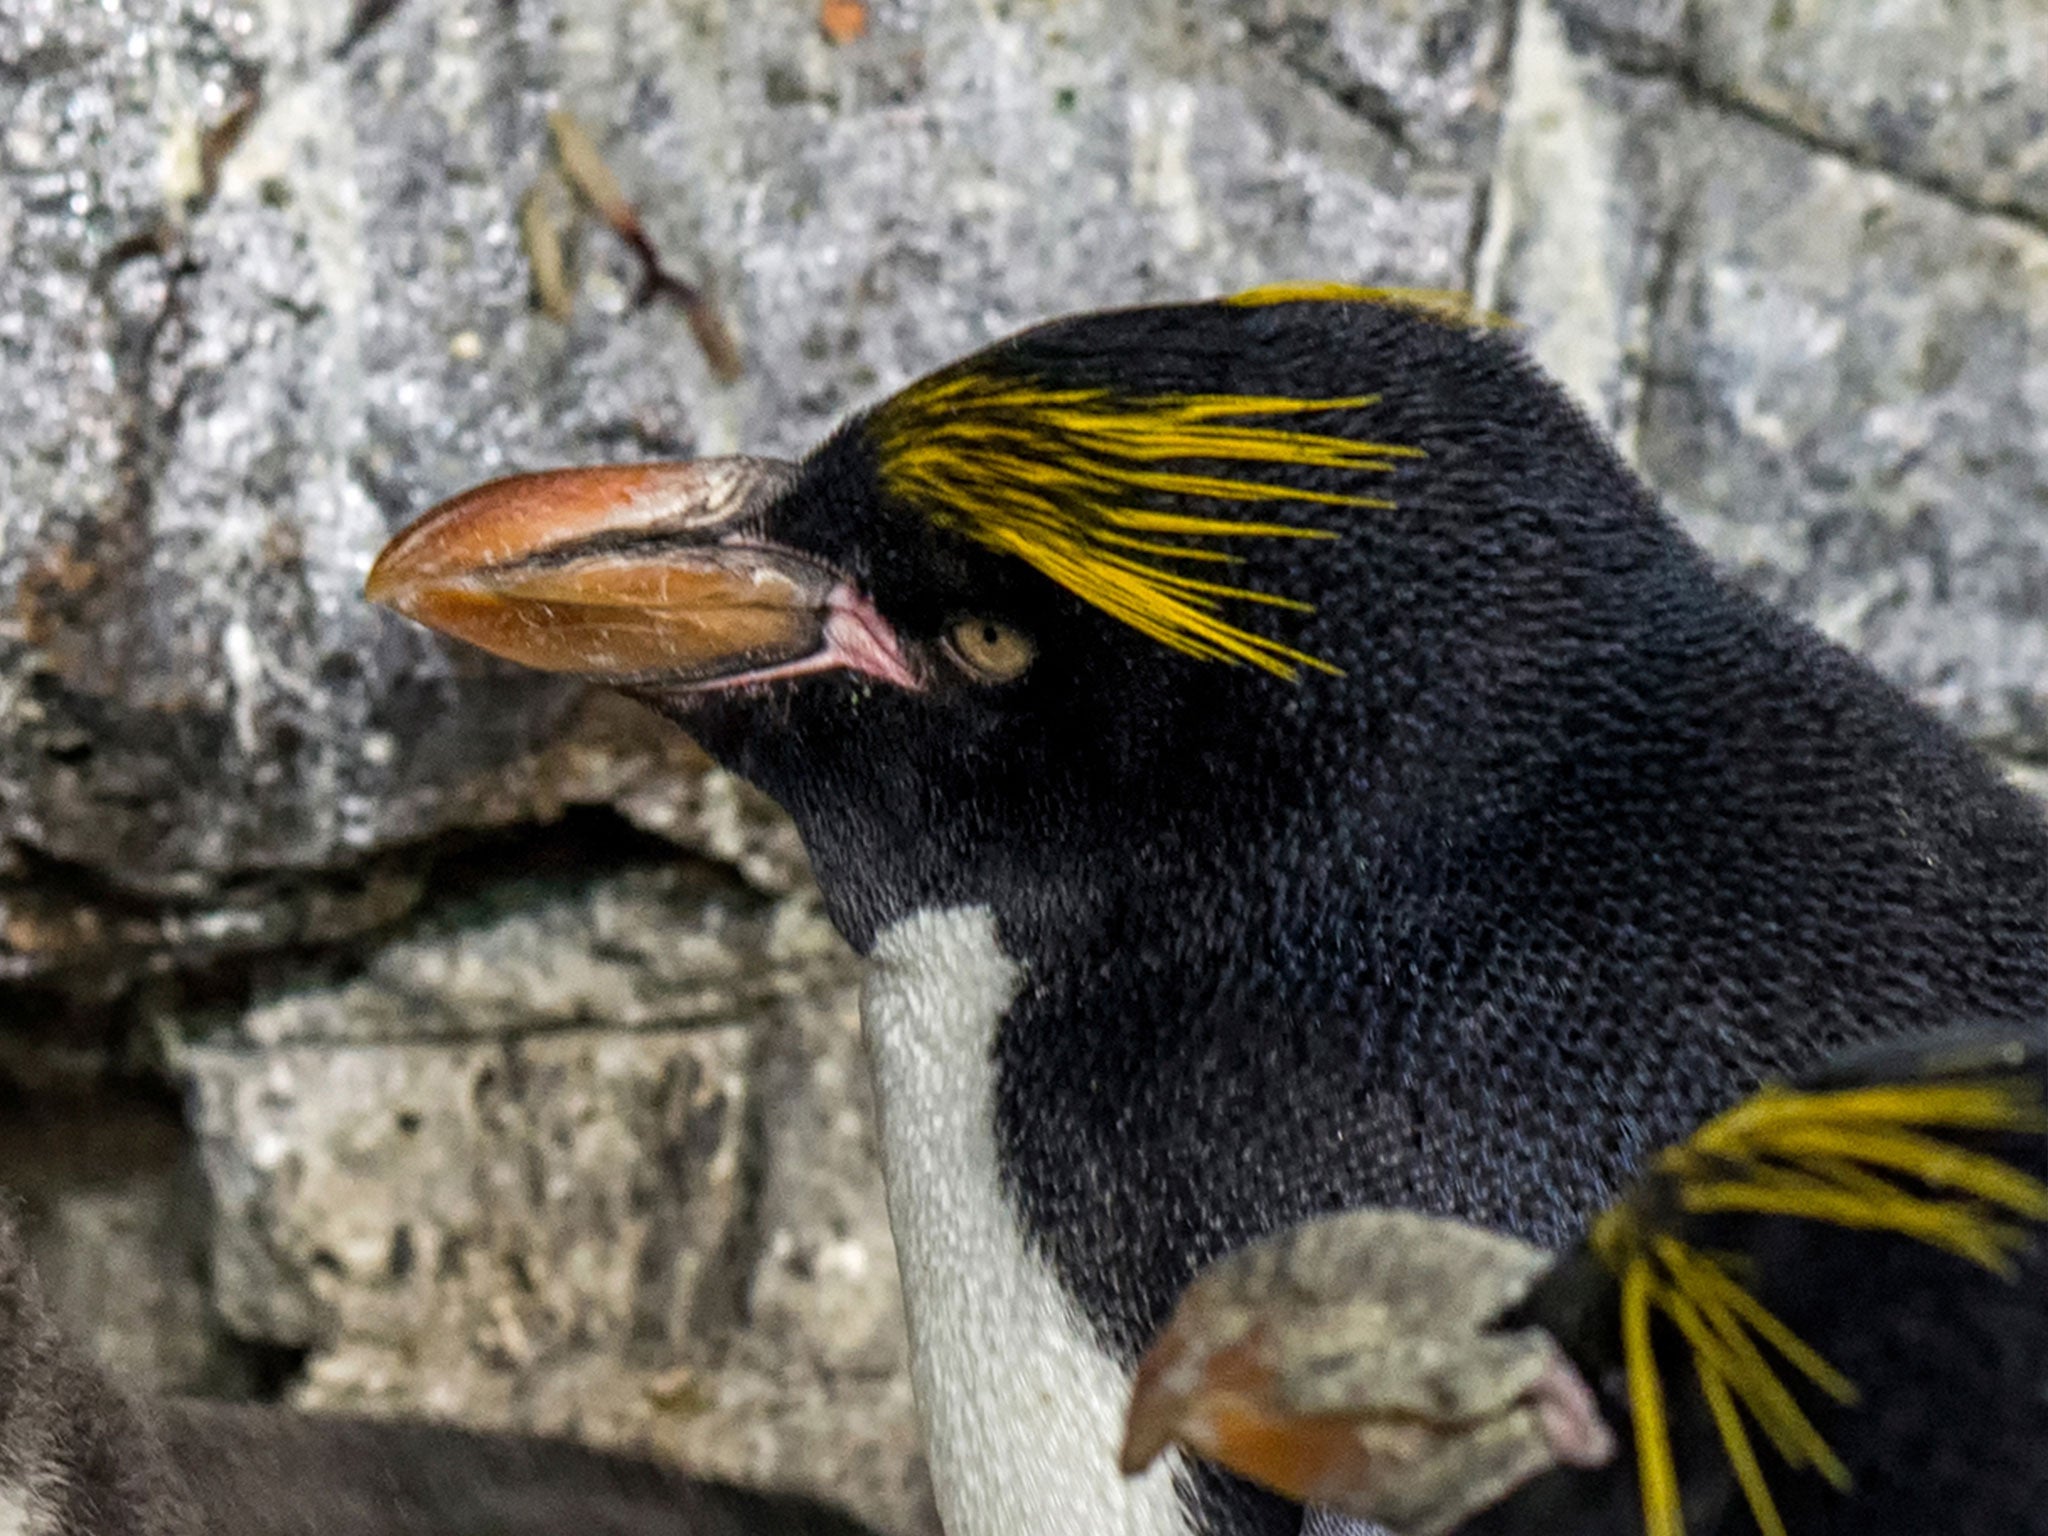 Experts believe the Macaroni penguin could be hardest hit as the UK is responsible for more of that globally-endangered species than any other nation